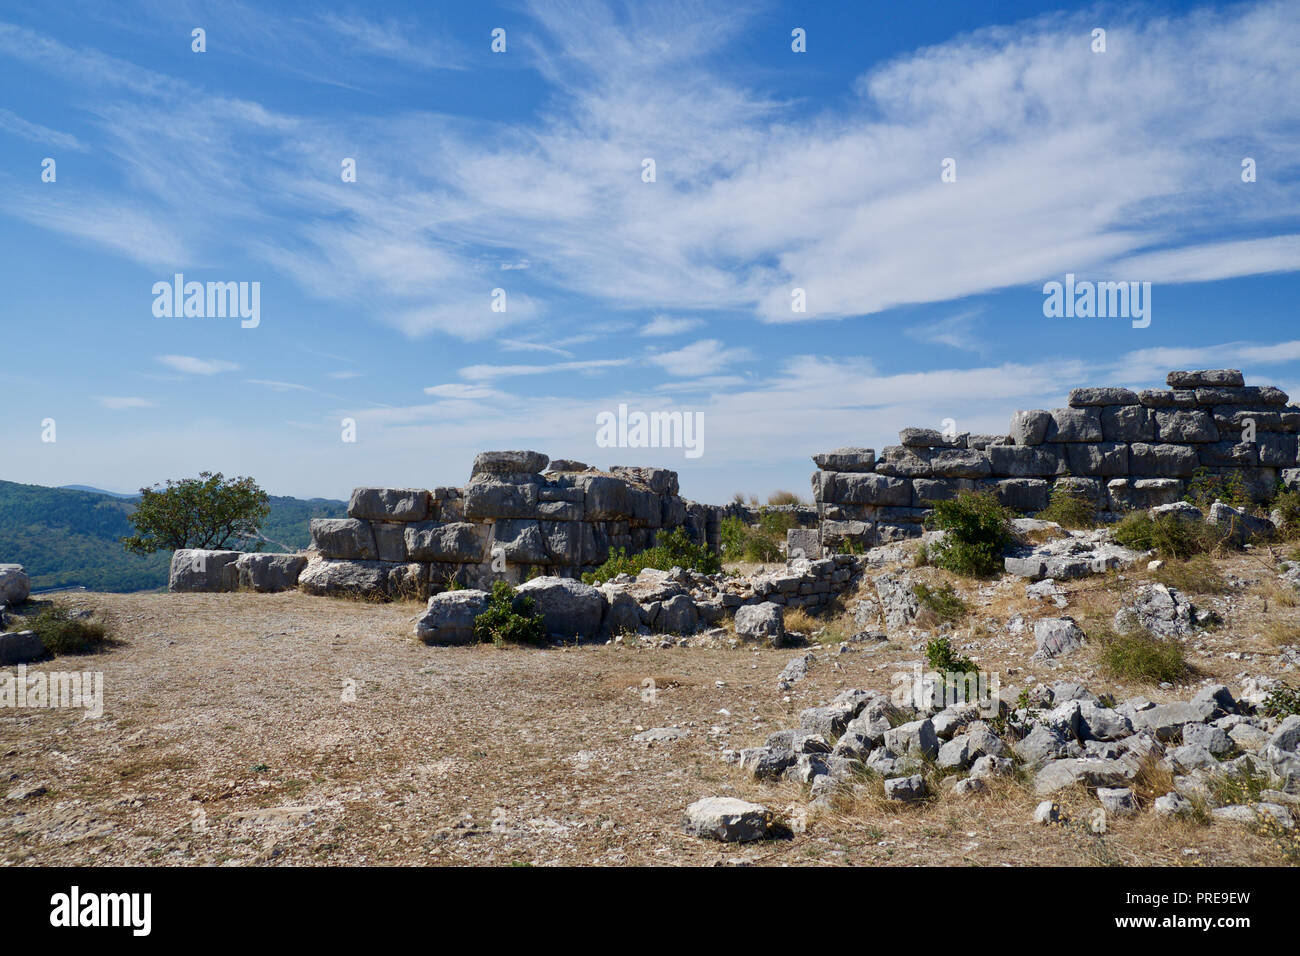 Daorson, remnants of acropolis of ancient Illyrian town in southern Bosnia and Herzegovina Stock Photo